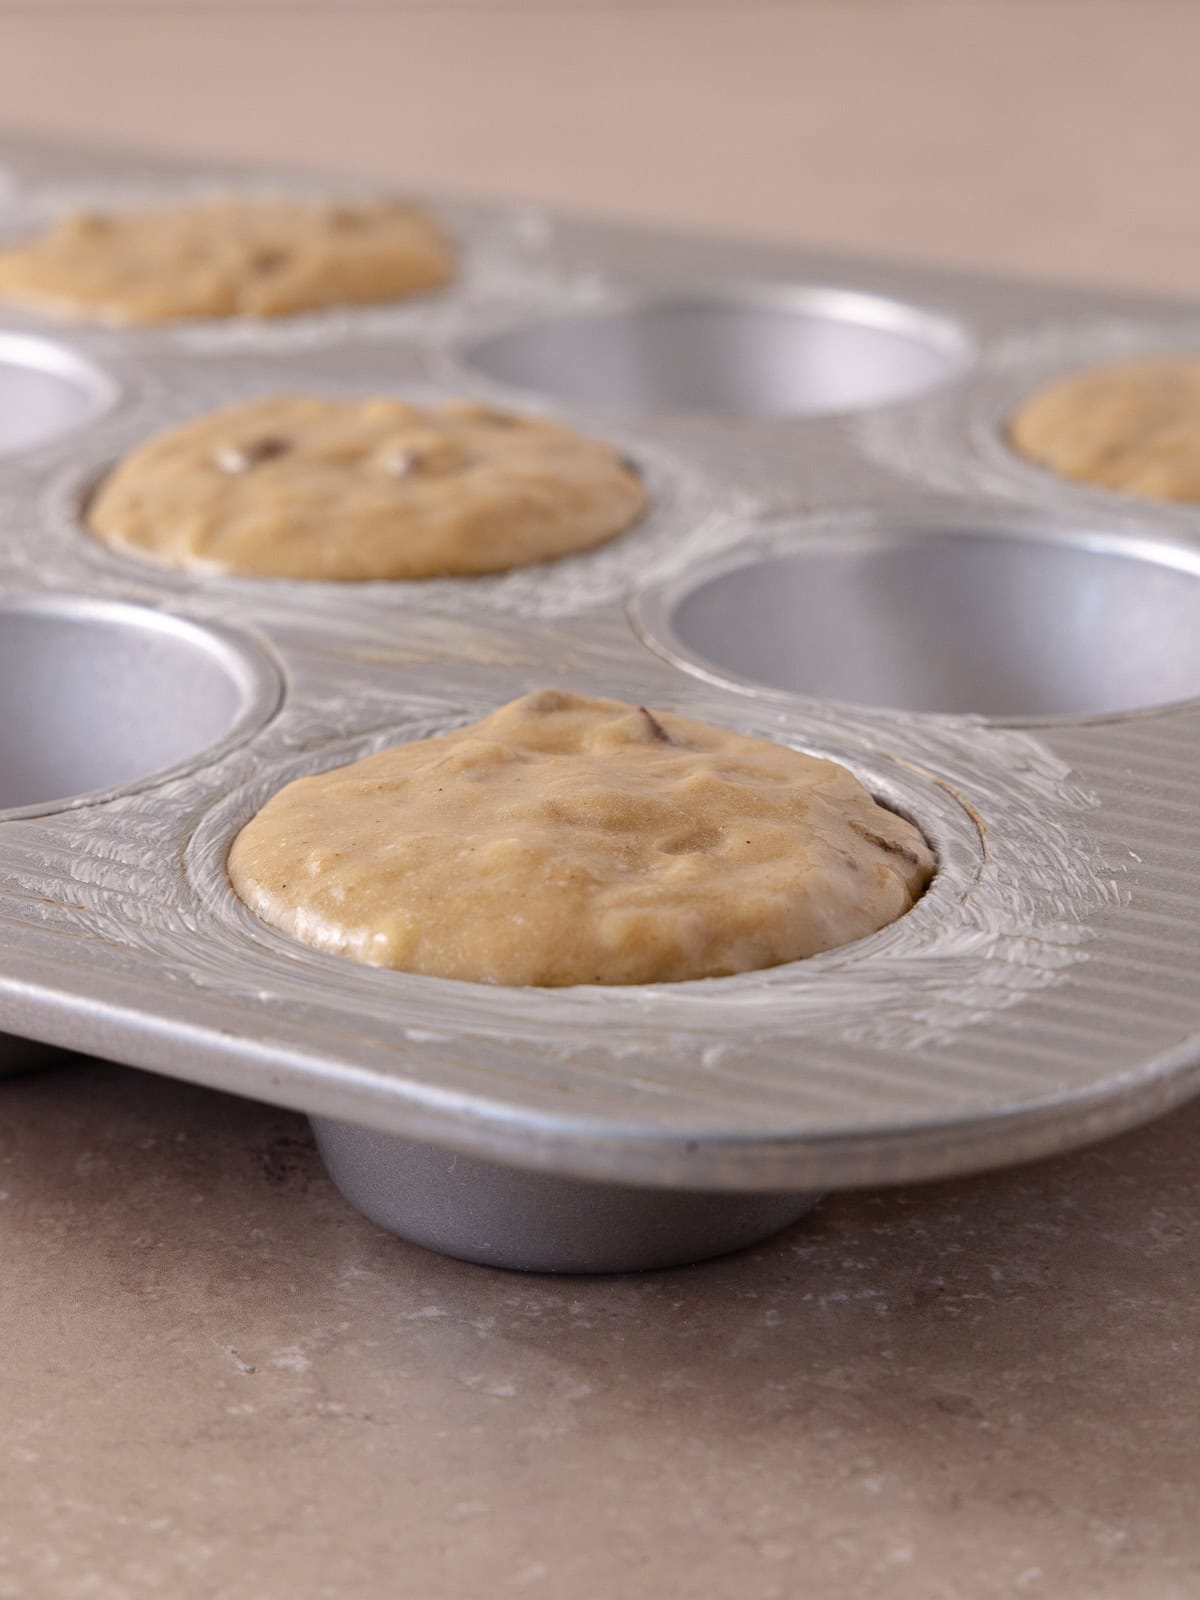 Muffin batter is poured in every other cavity of a muffin pan.